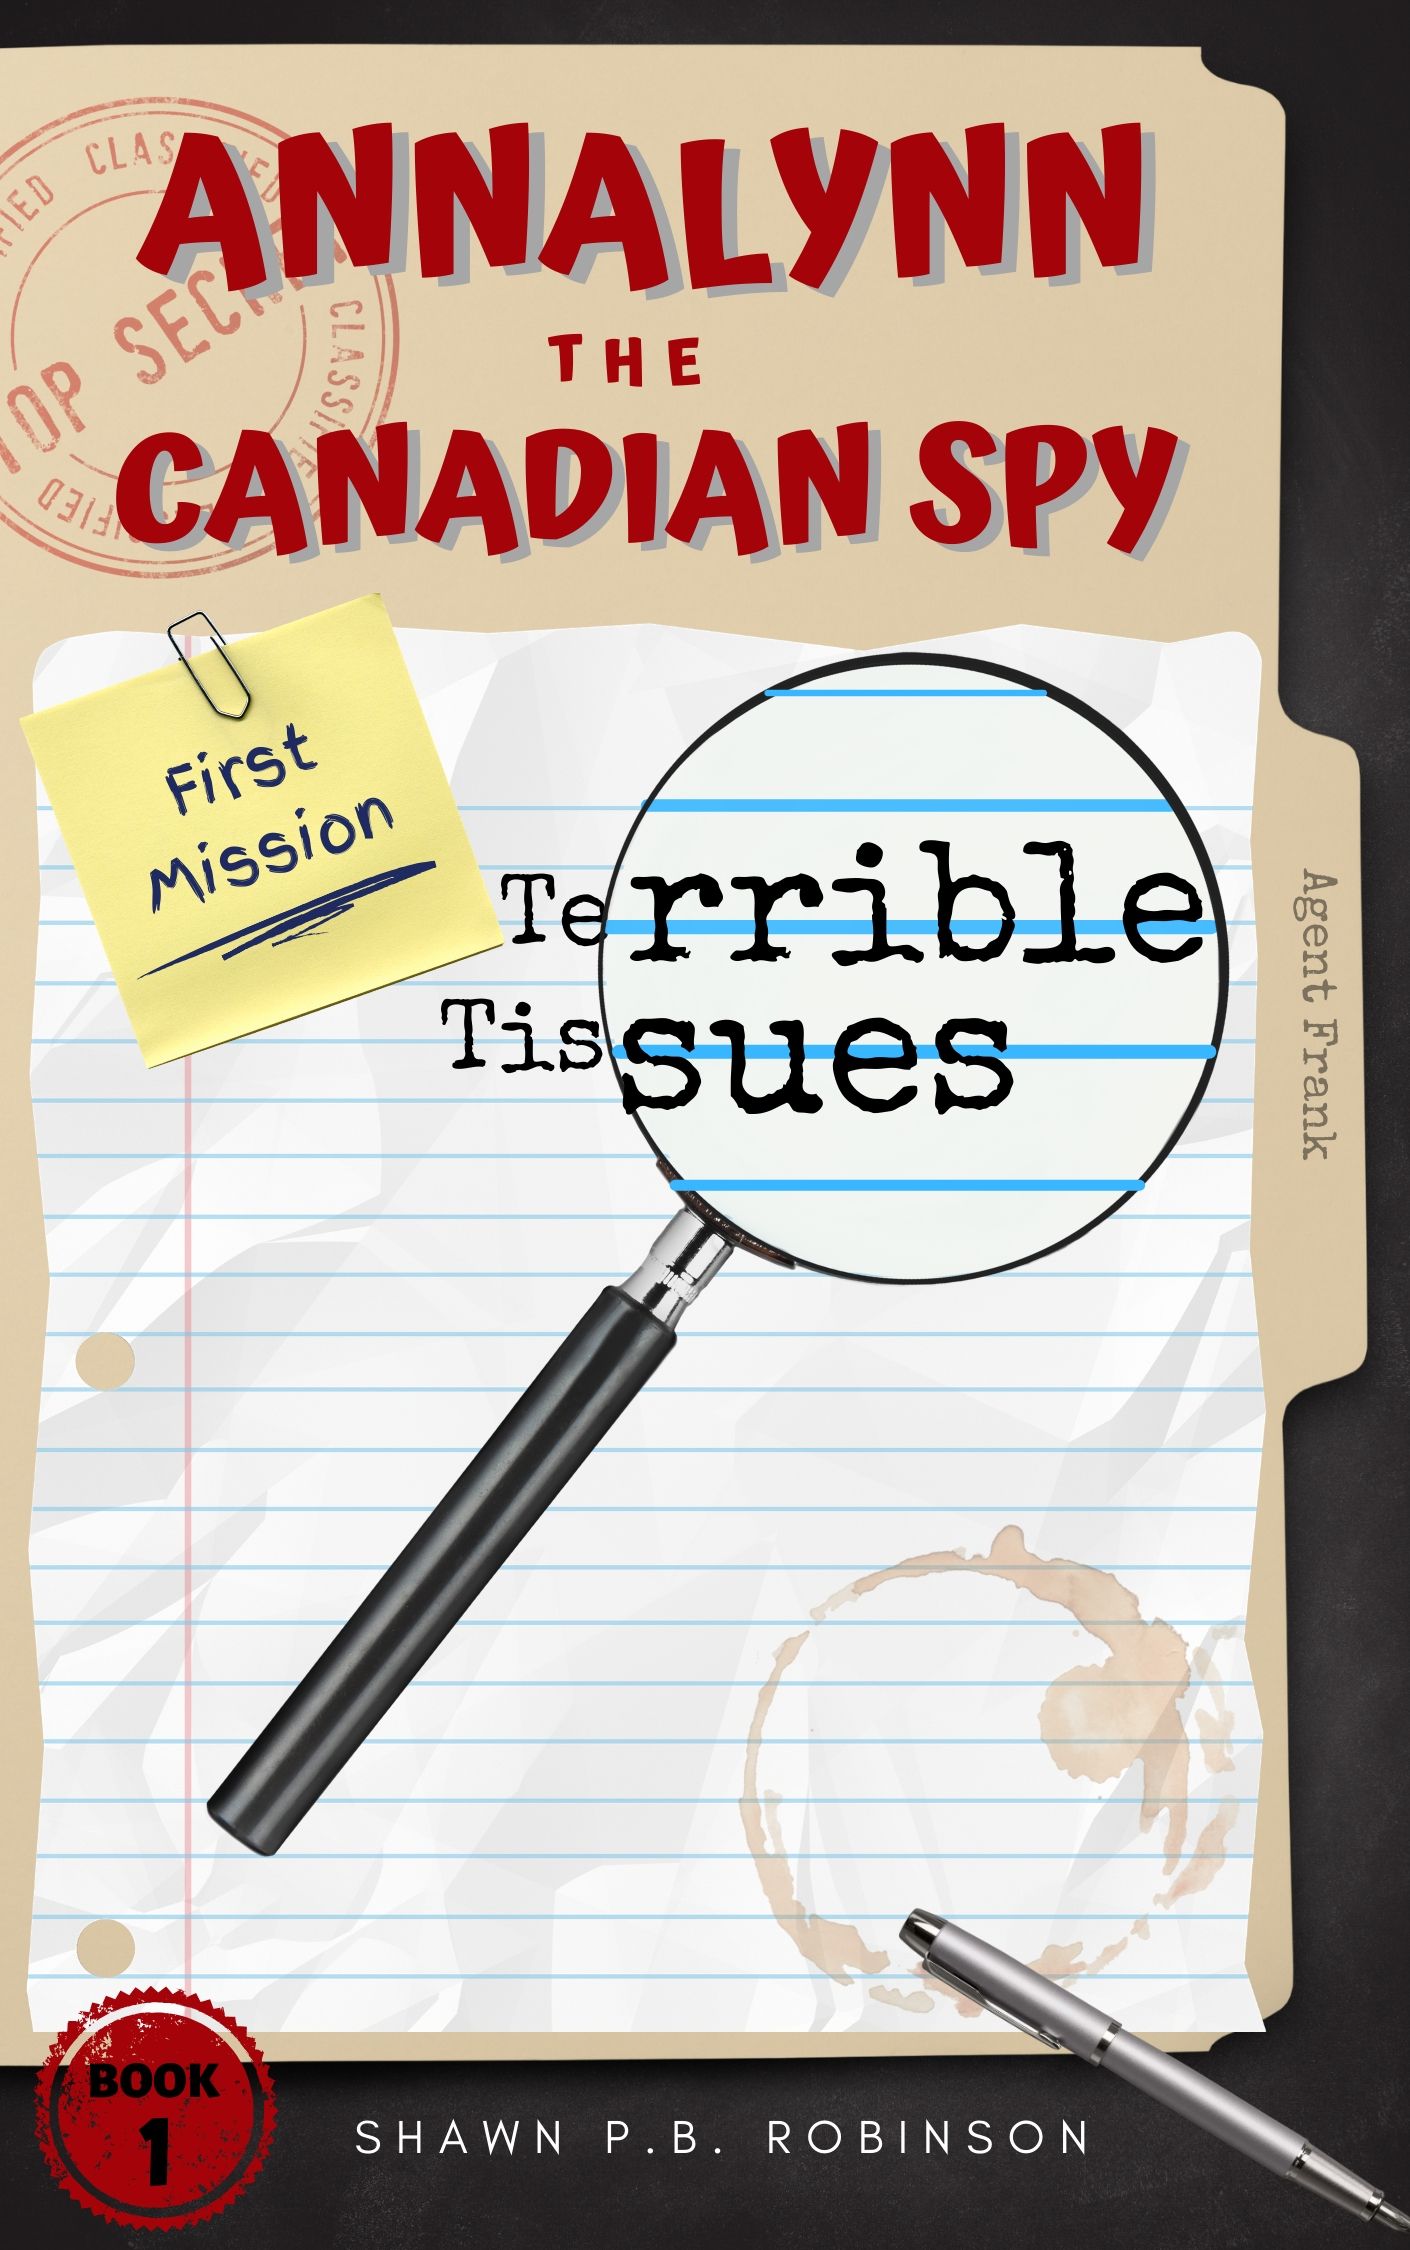 Annalynn the Canadian Spy Review from a Great Reviewer!